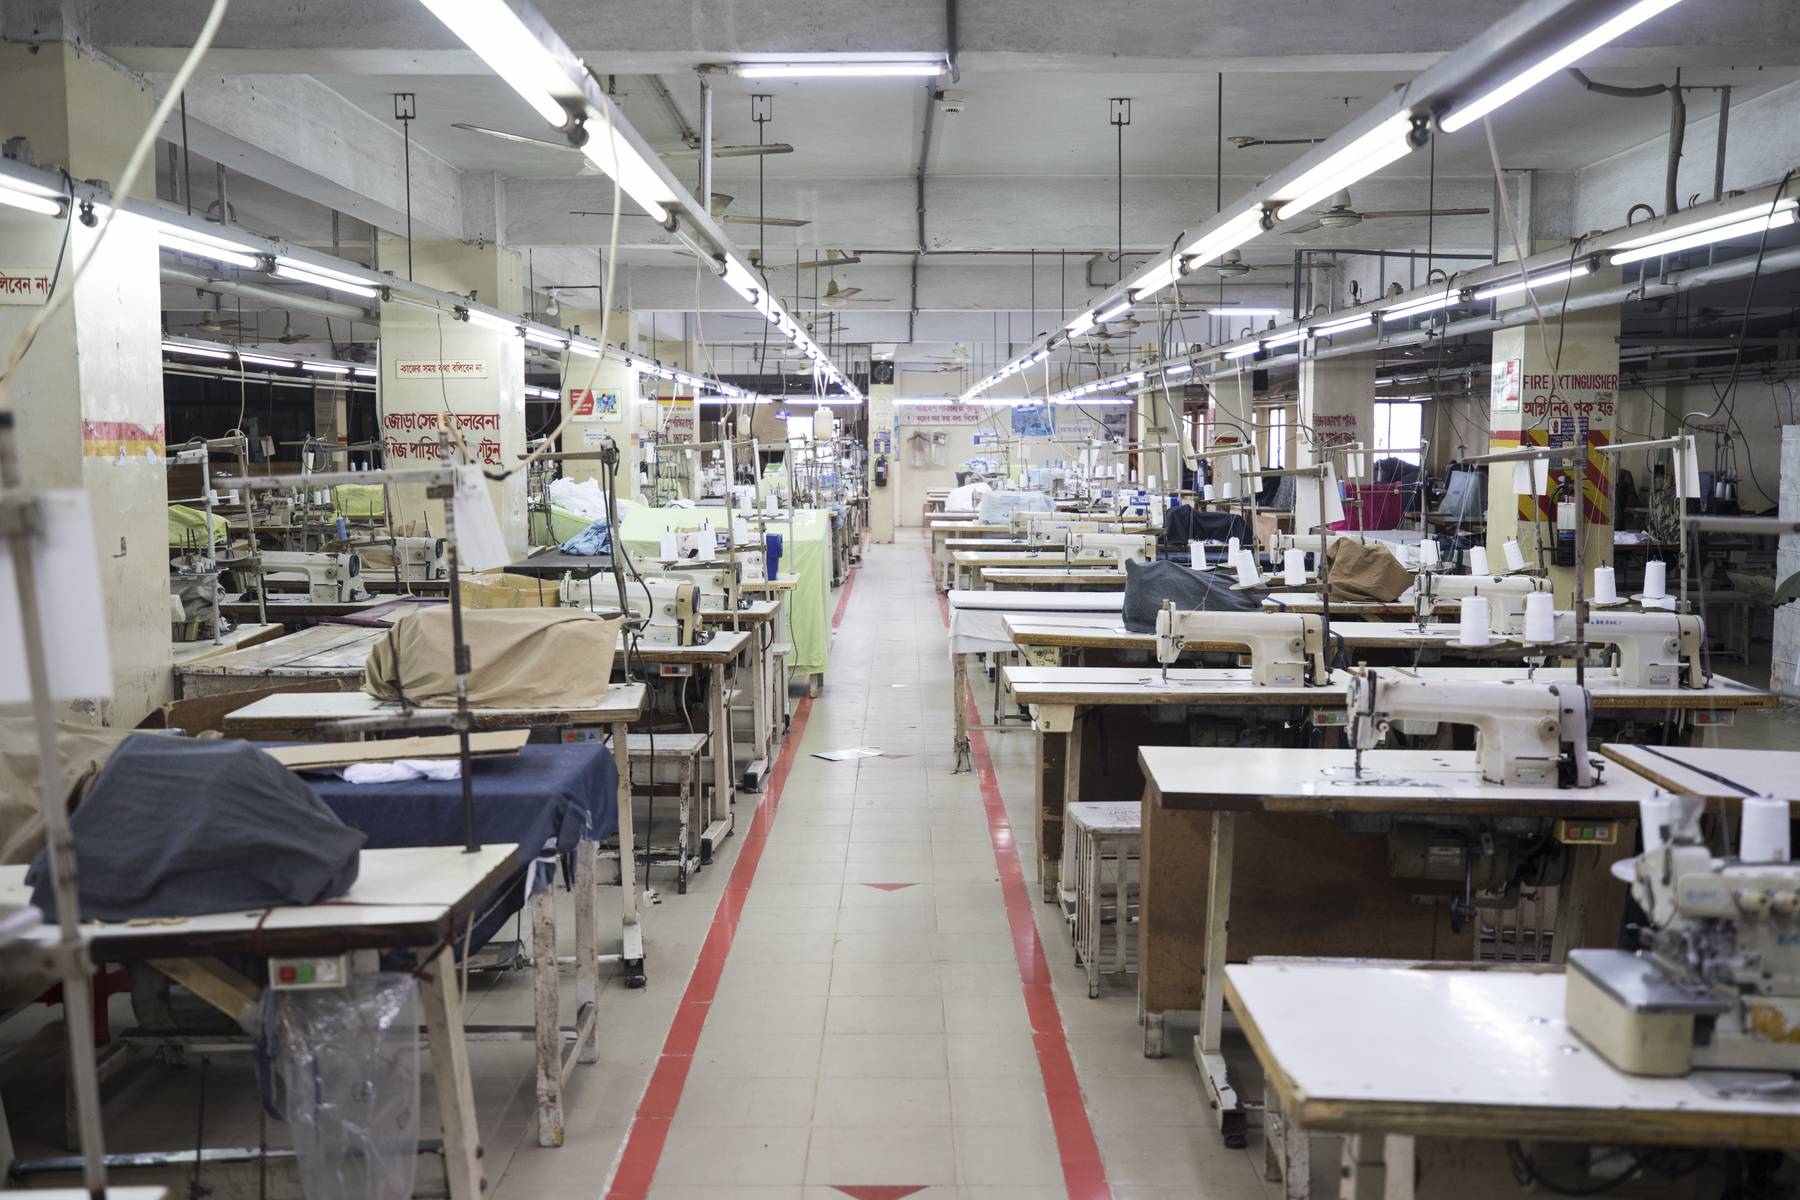 A garment factory in Dhaka, Bangladesh closed due to lockdown in April 2020.